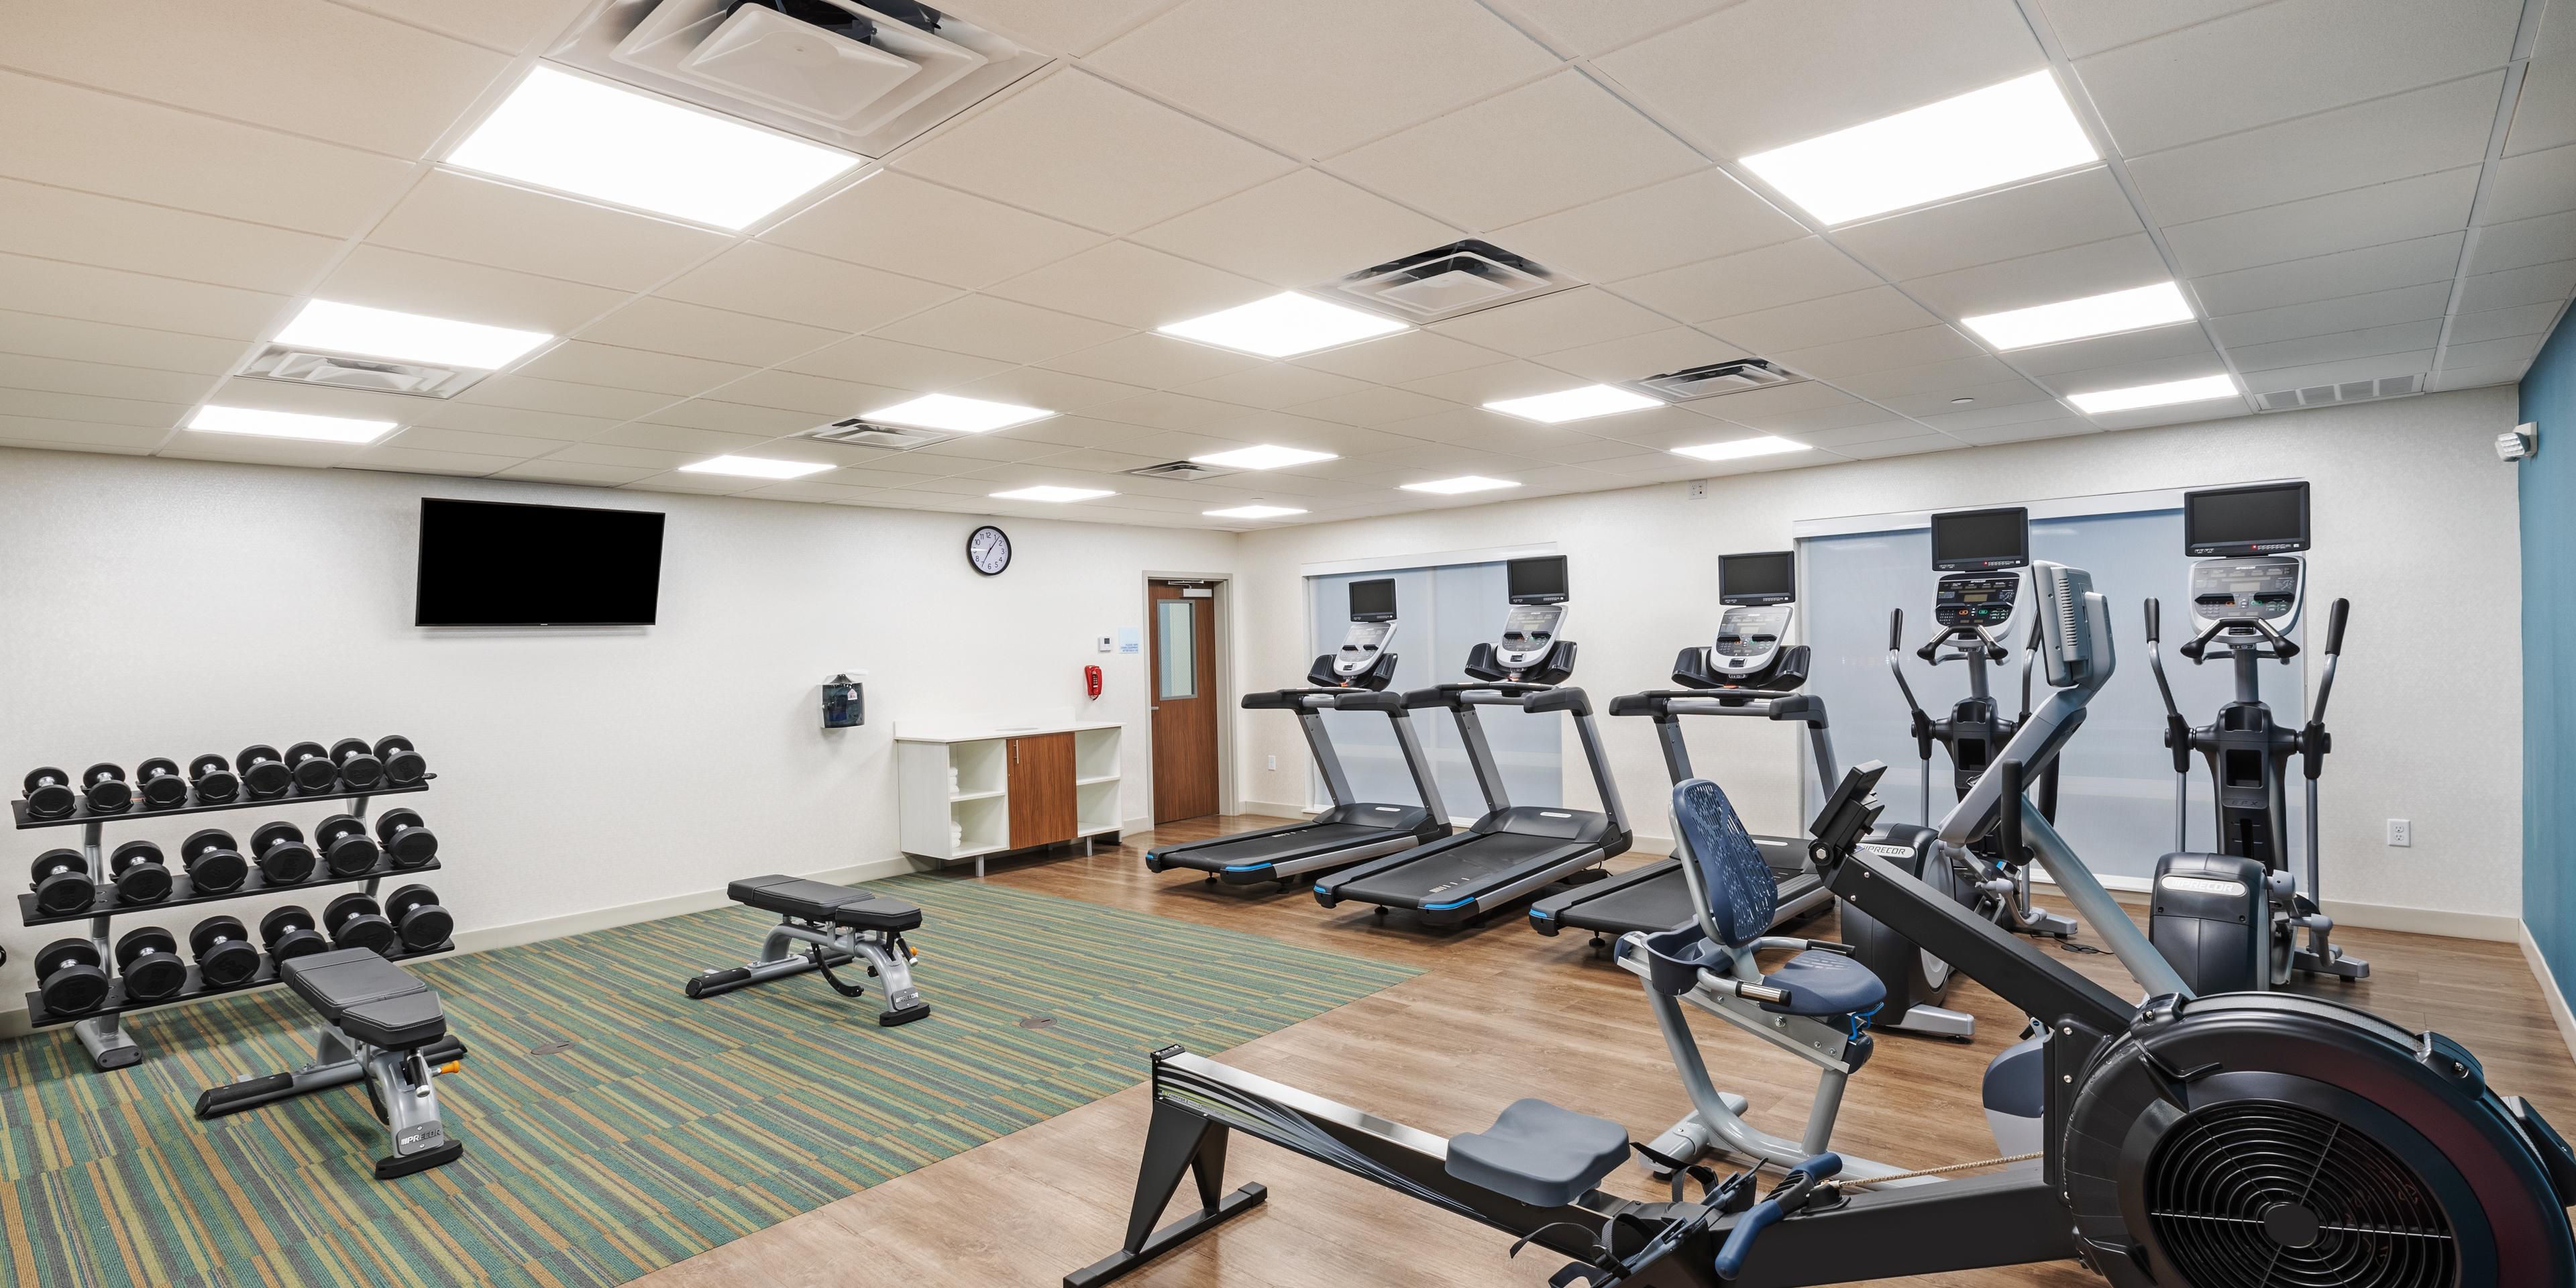 Our on-site Fitness Center is accessible 24 hours offering a convenient place to work out during your stay. Featured equipment includes treadmills and a recumbent bike. Stay hydrated with available bottled water. A television and magazines are available for your entertainment.